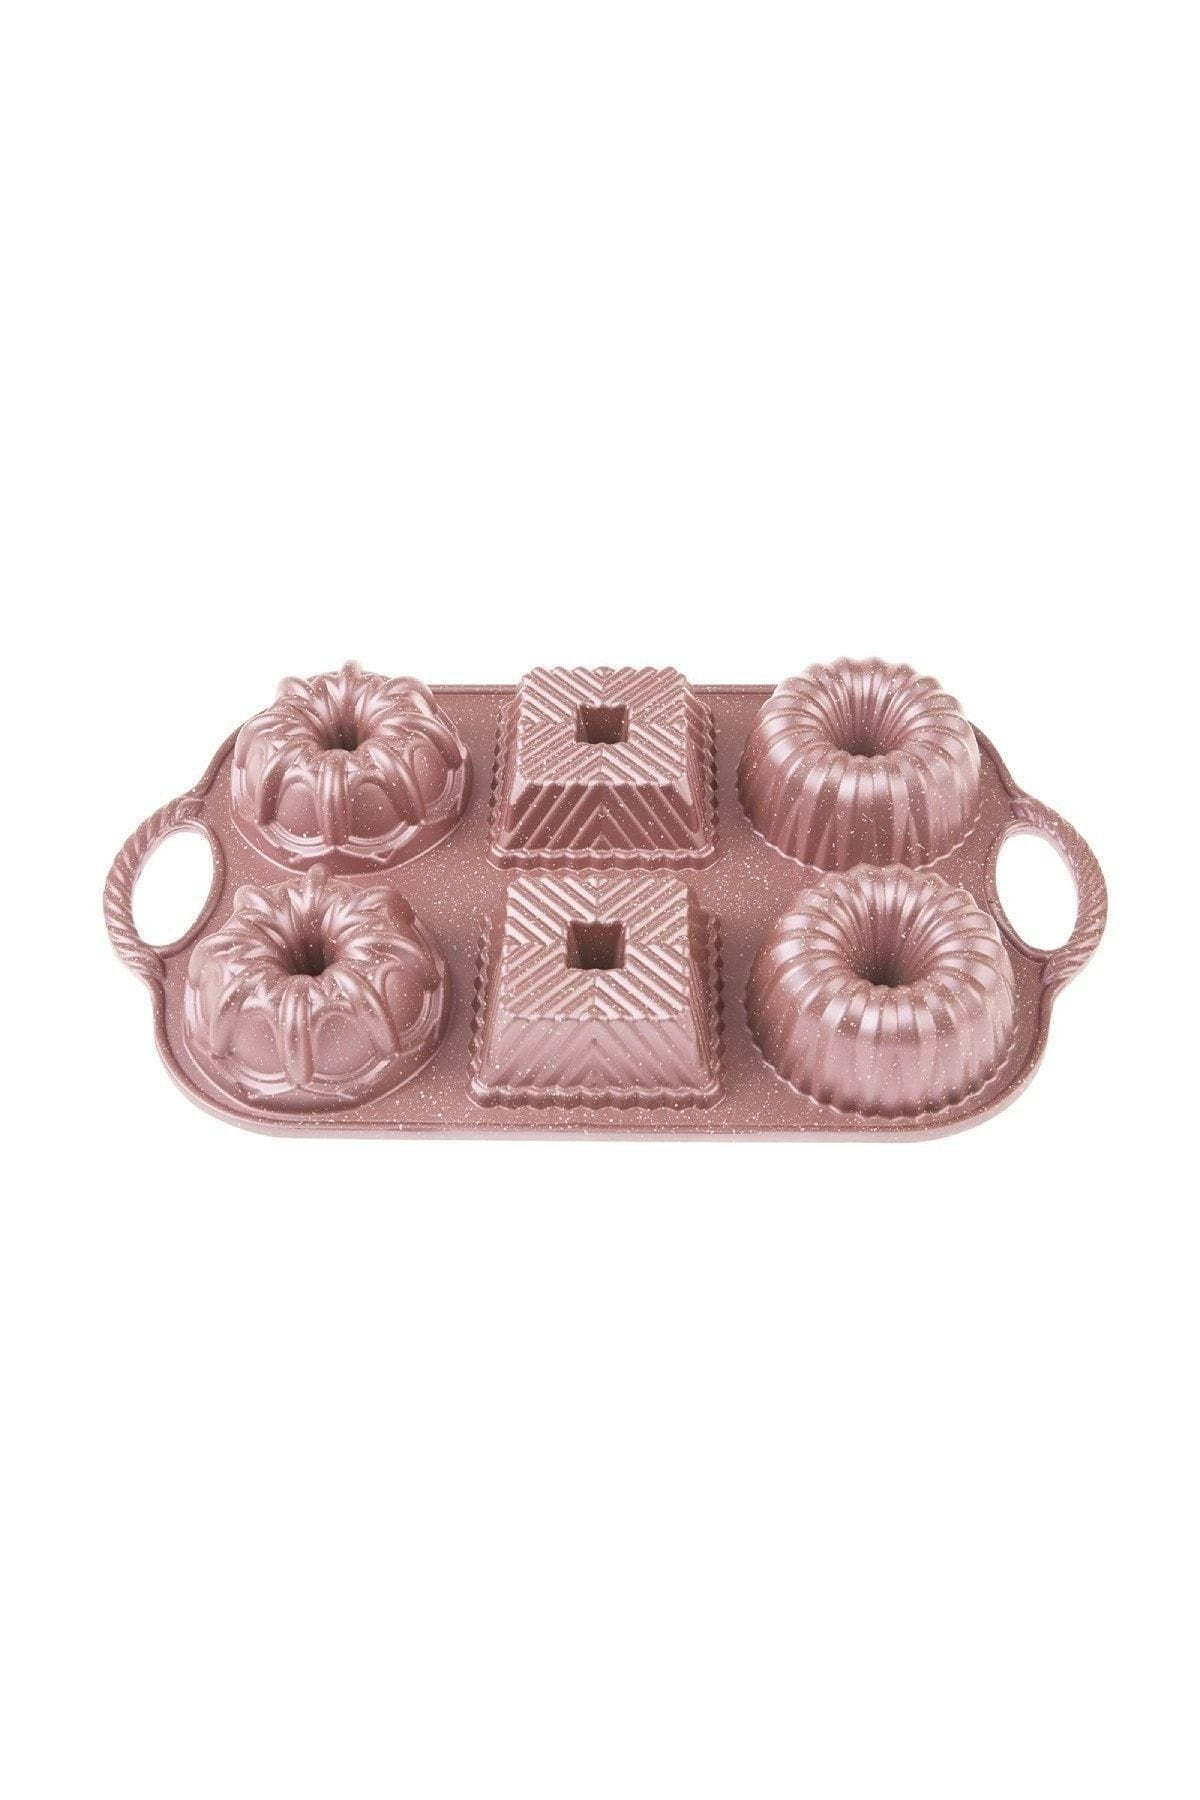 Griss Six In One 6 Piece Cast Iron Cake Mold Pink